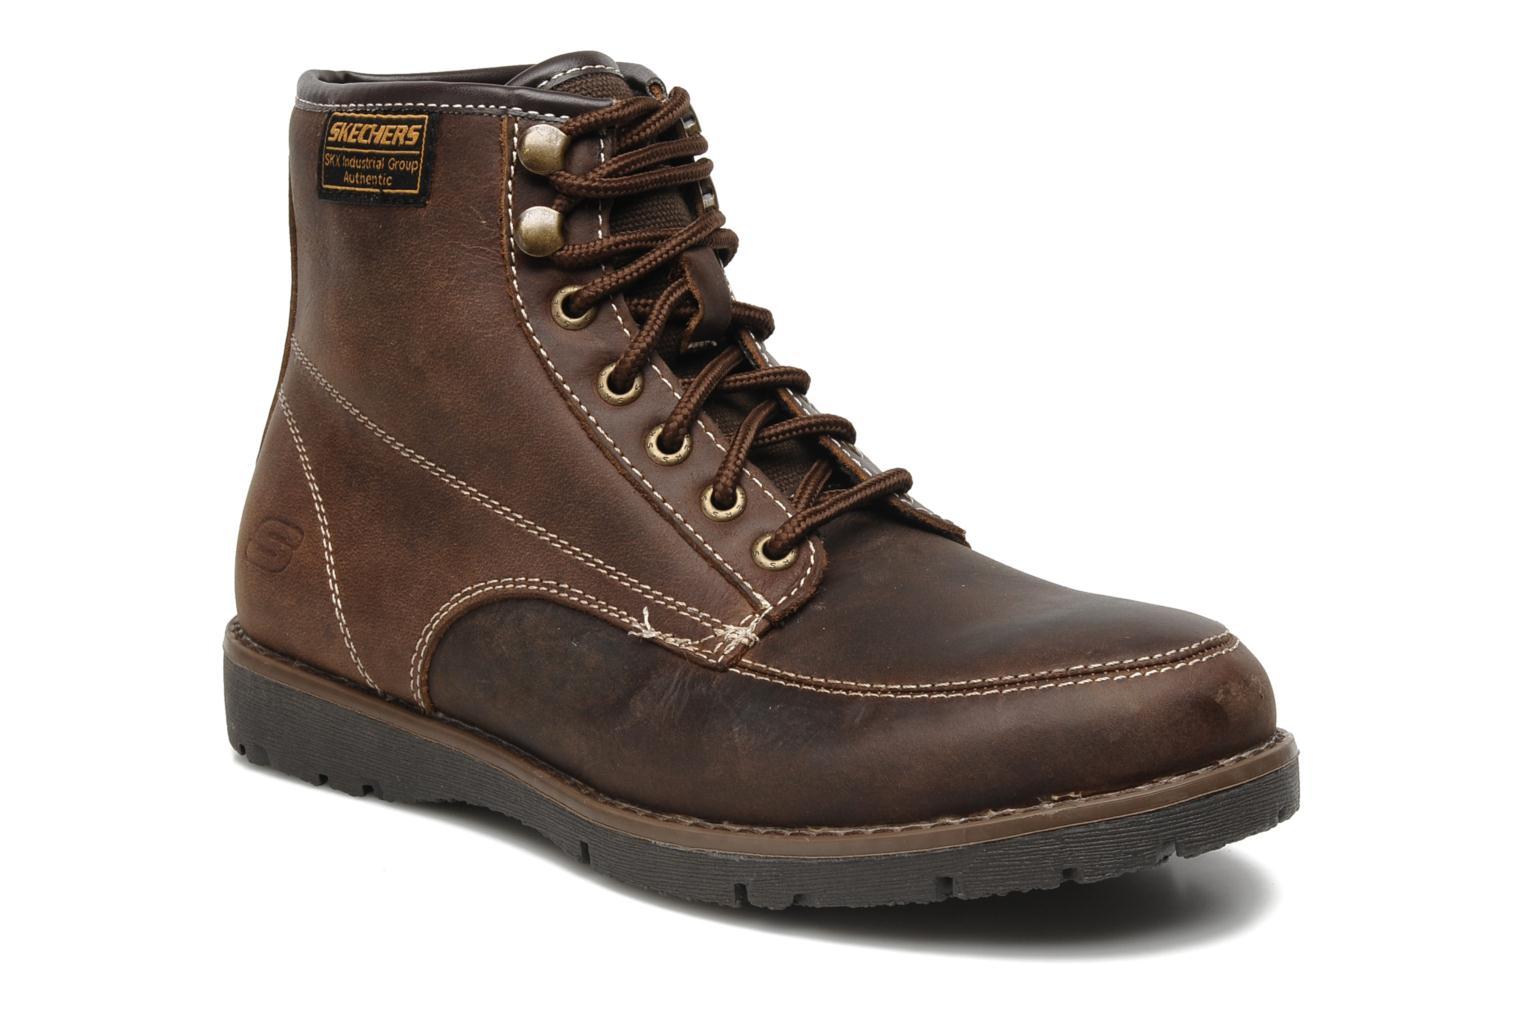 Foto Botines Skechers Toe stitch lace up Boot 63602 Hombre